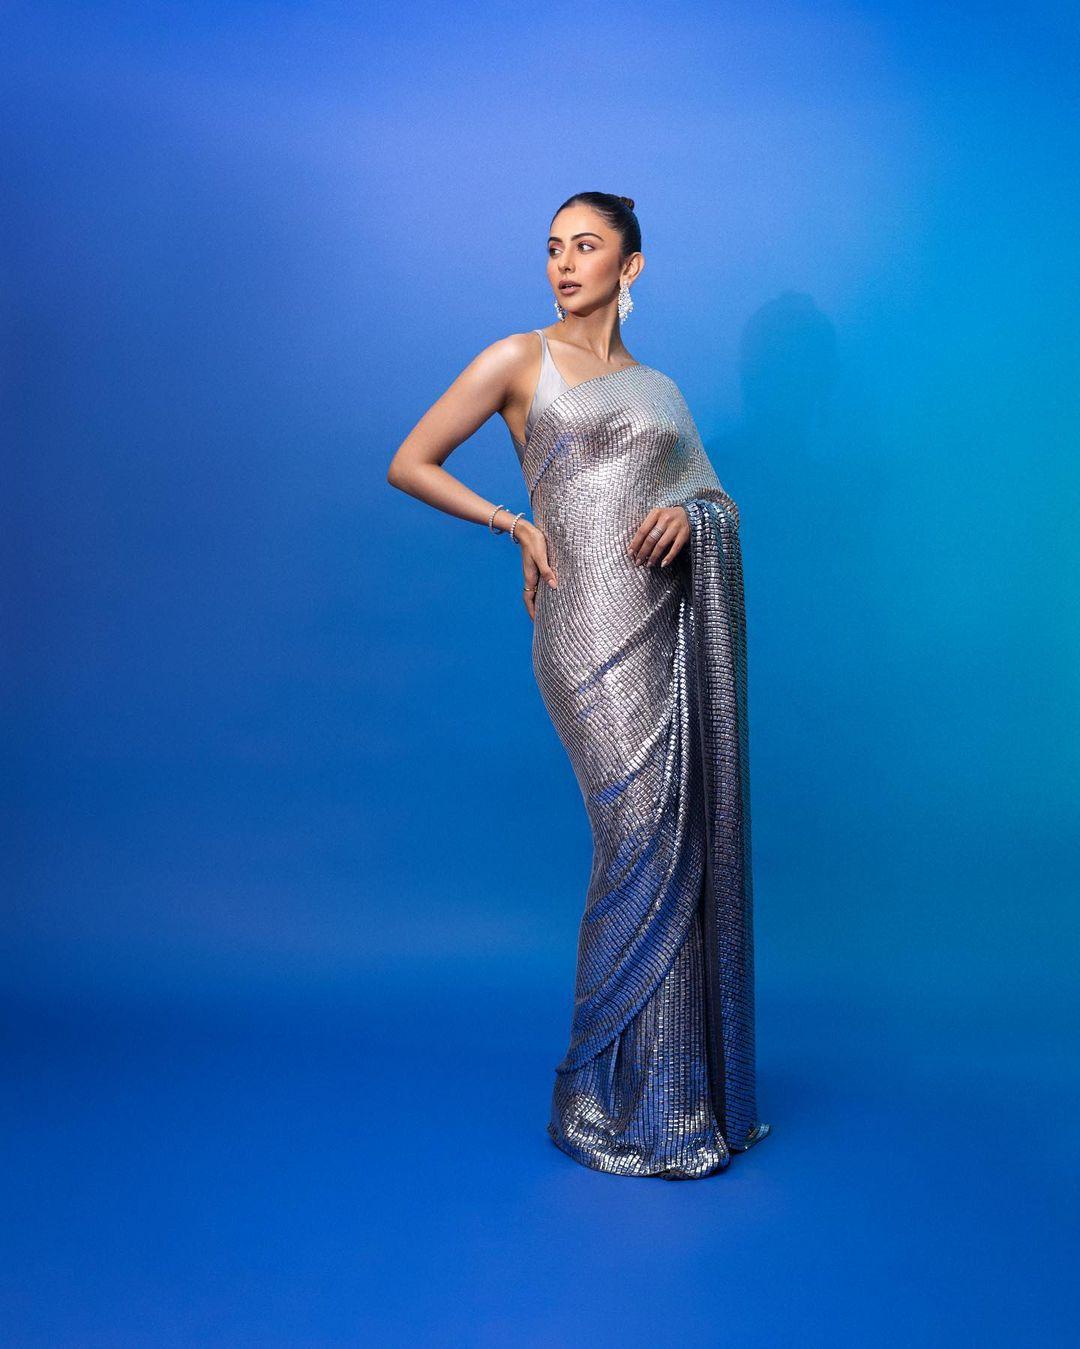 Rakul Preet Singh truly stole the show at a recent glamorous event. She graced the red carpet wearing a stunning metallic grey saree that left everyone in awe.